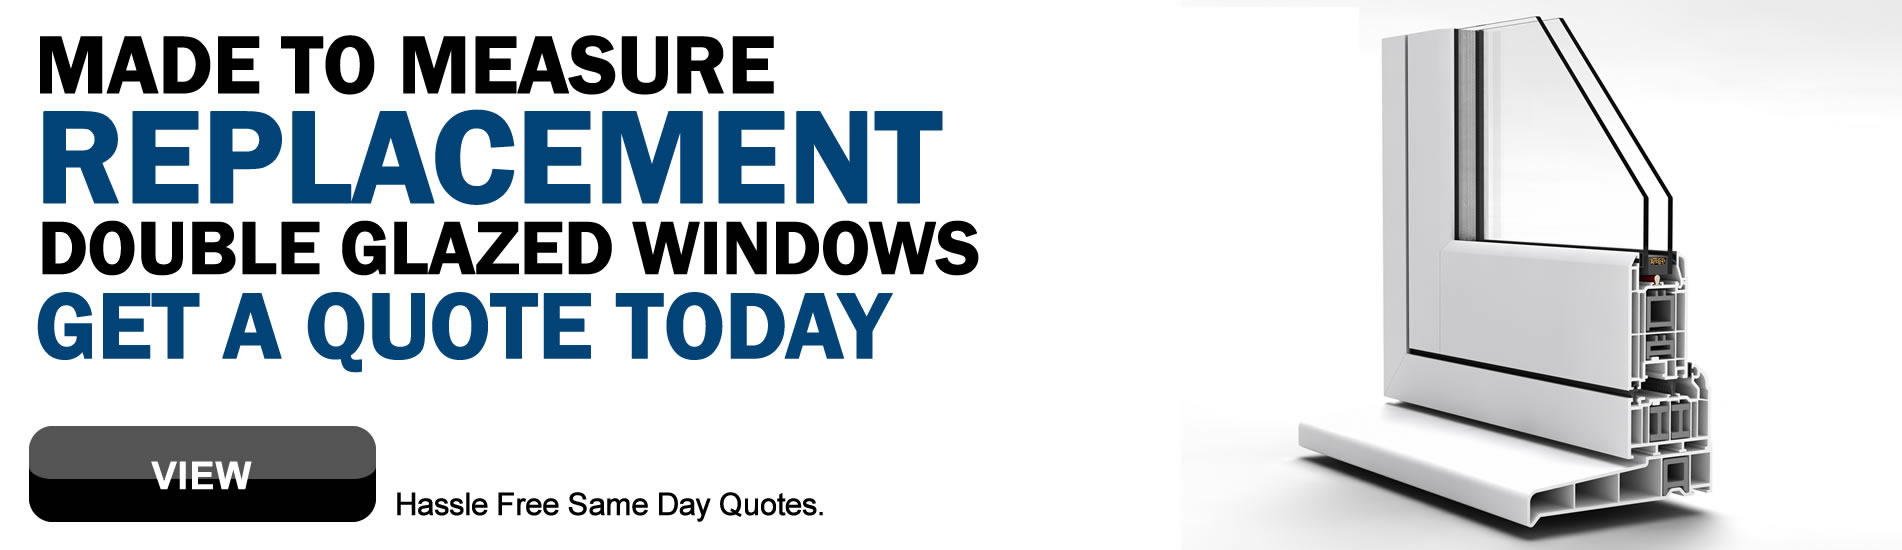 we fit new windows throughout kent, read more about what we can offer you